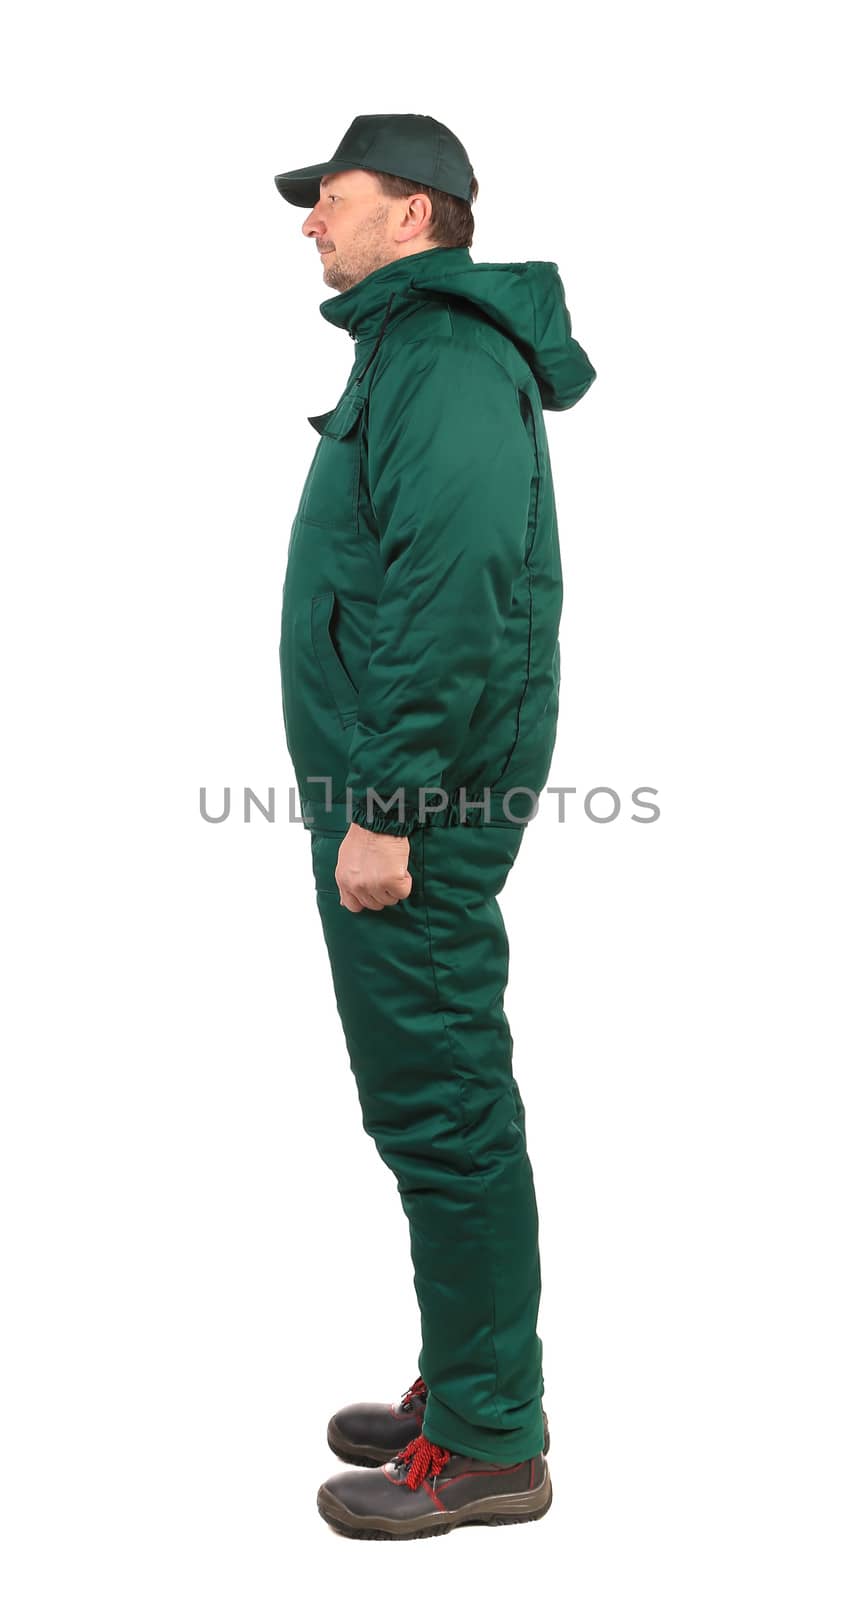 Worker in green overalls. Isolated on a white background.